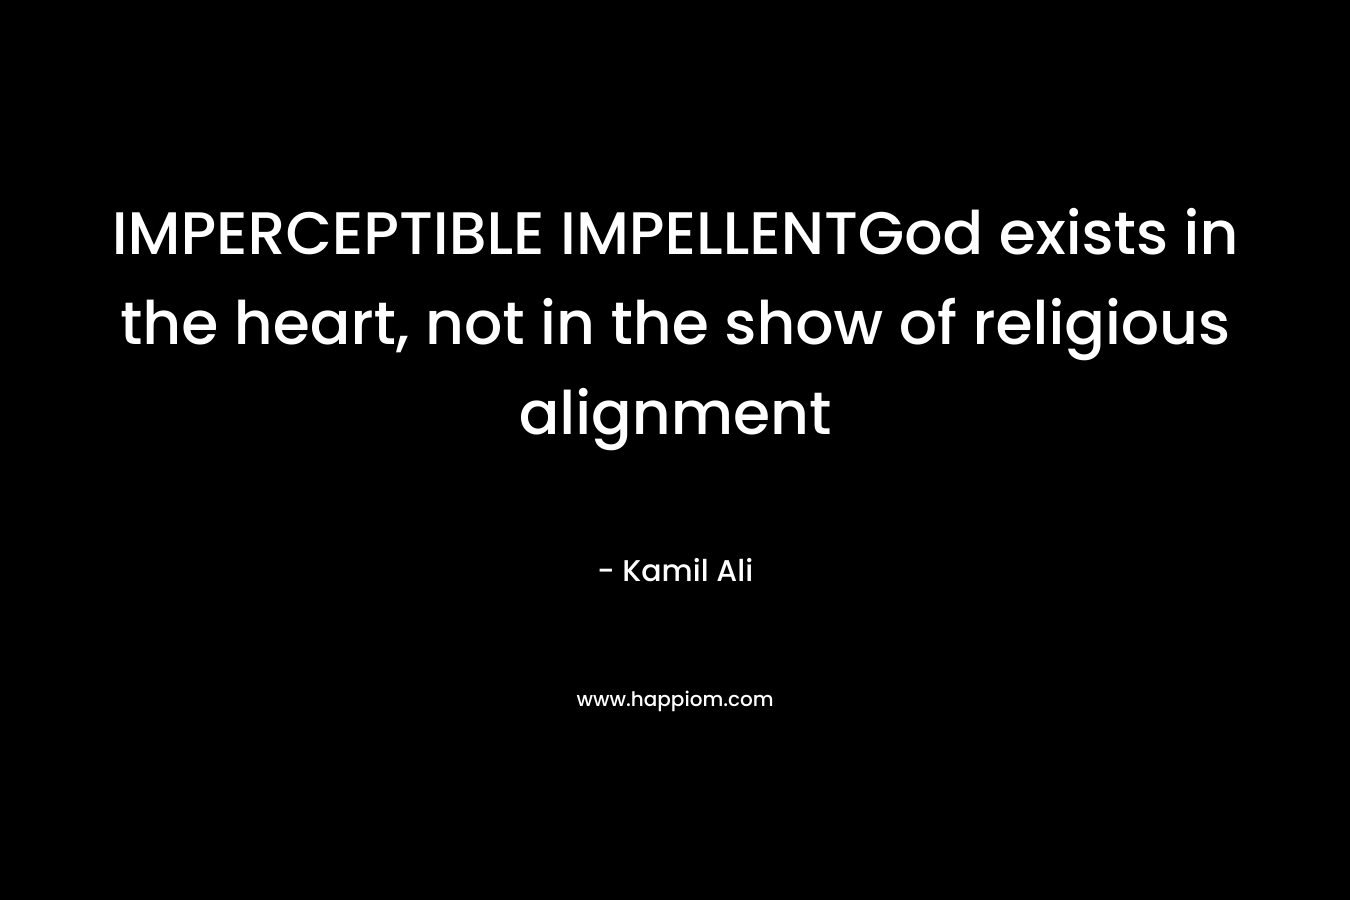 IMPERCEPTIBLE IMPELLENTGod exists in the heart, not in the show of religious alignment – Kamil Ali